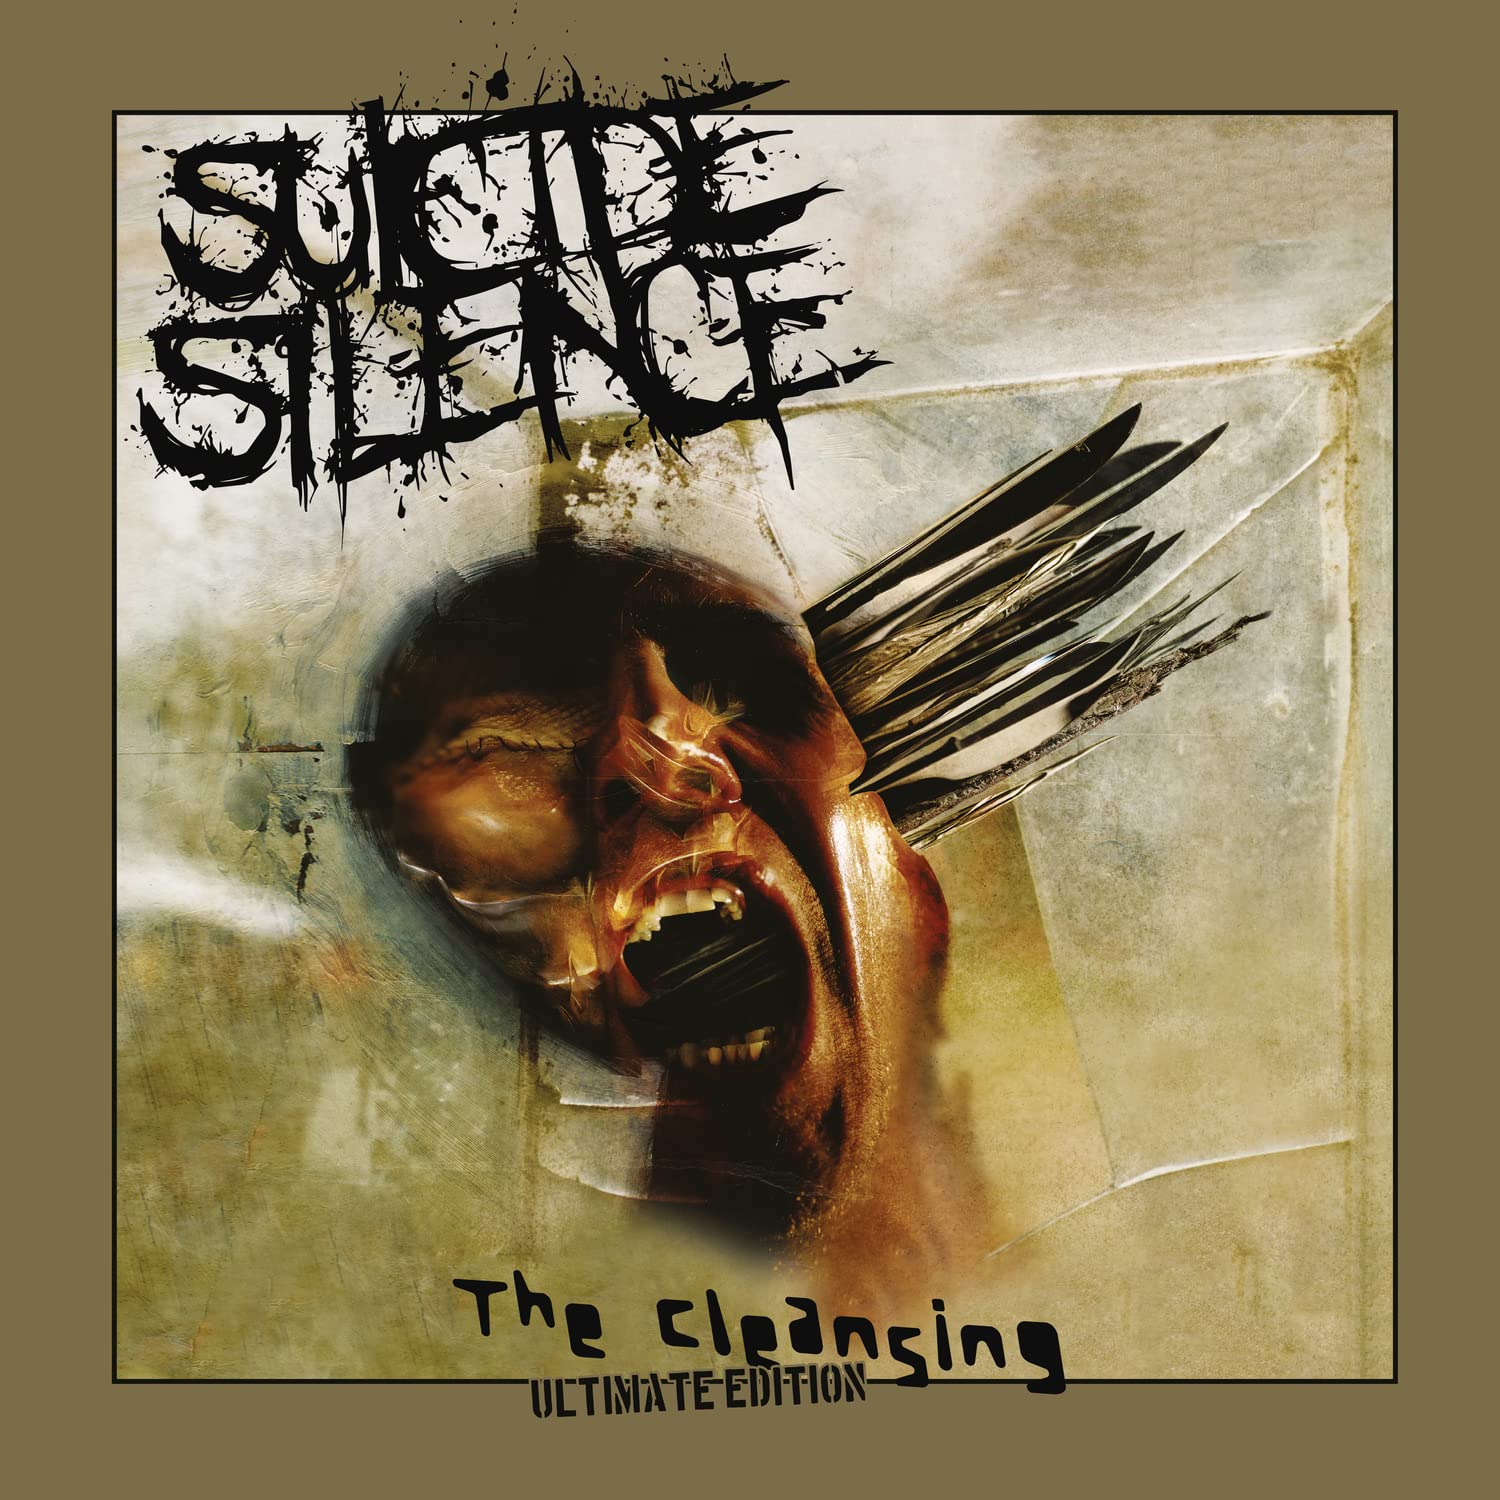 The Cleansing (Ultimate Edition) (Gatefold black 2LP & Poster)